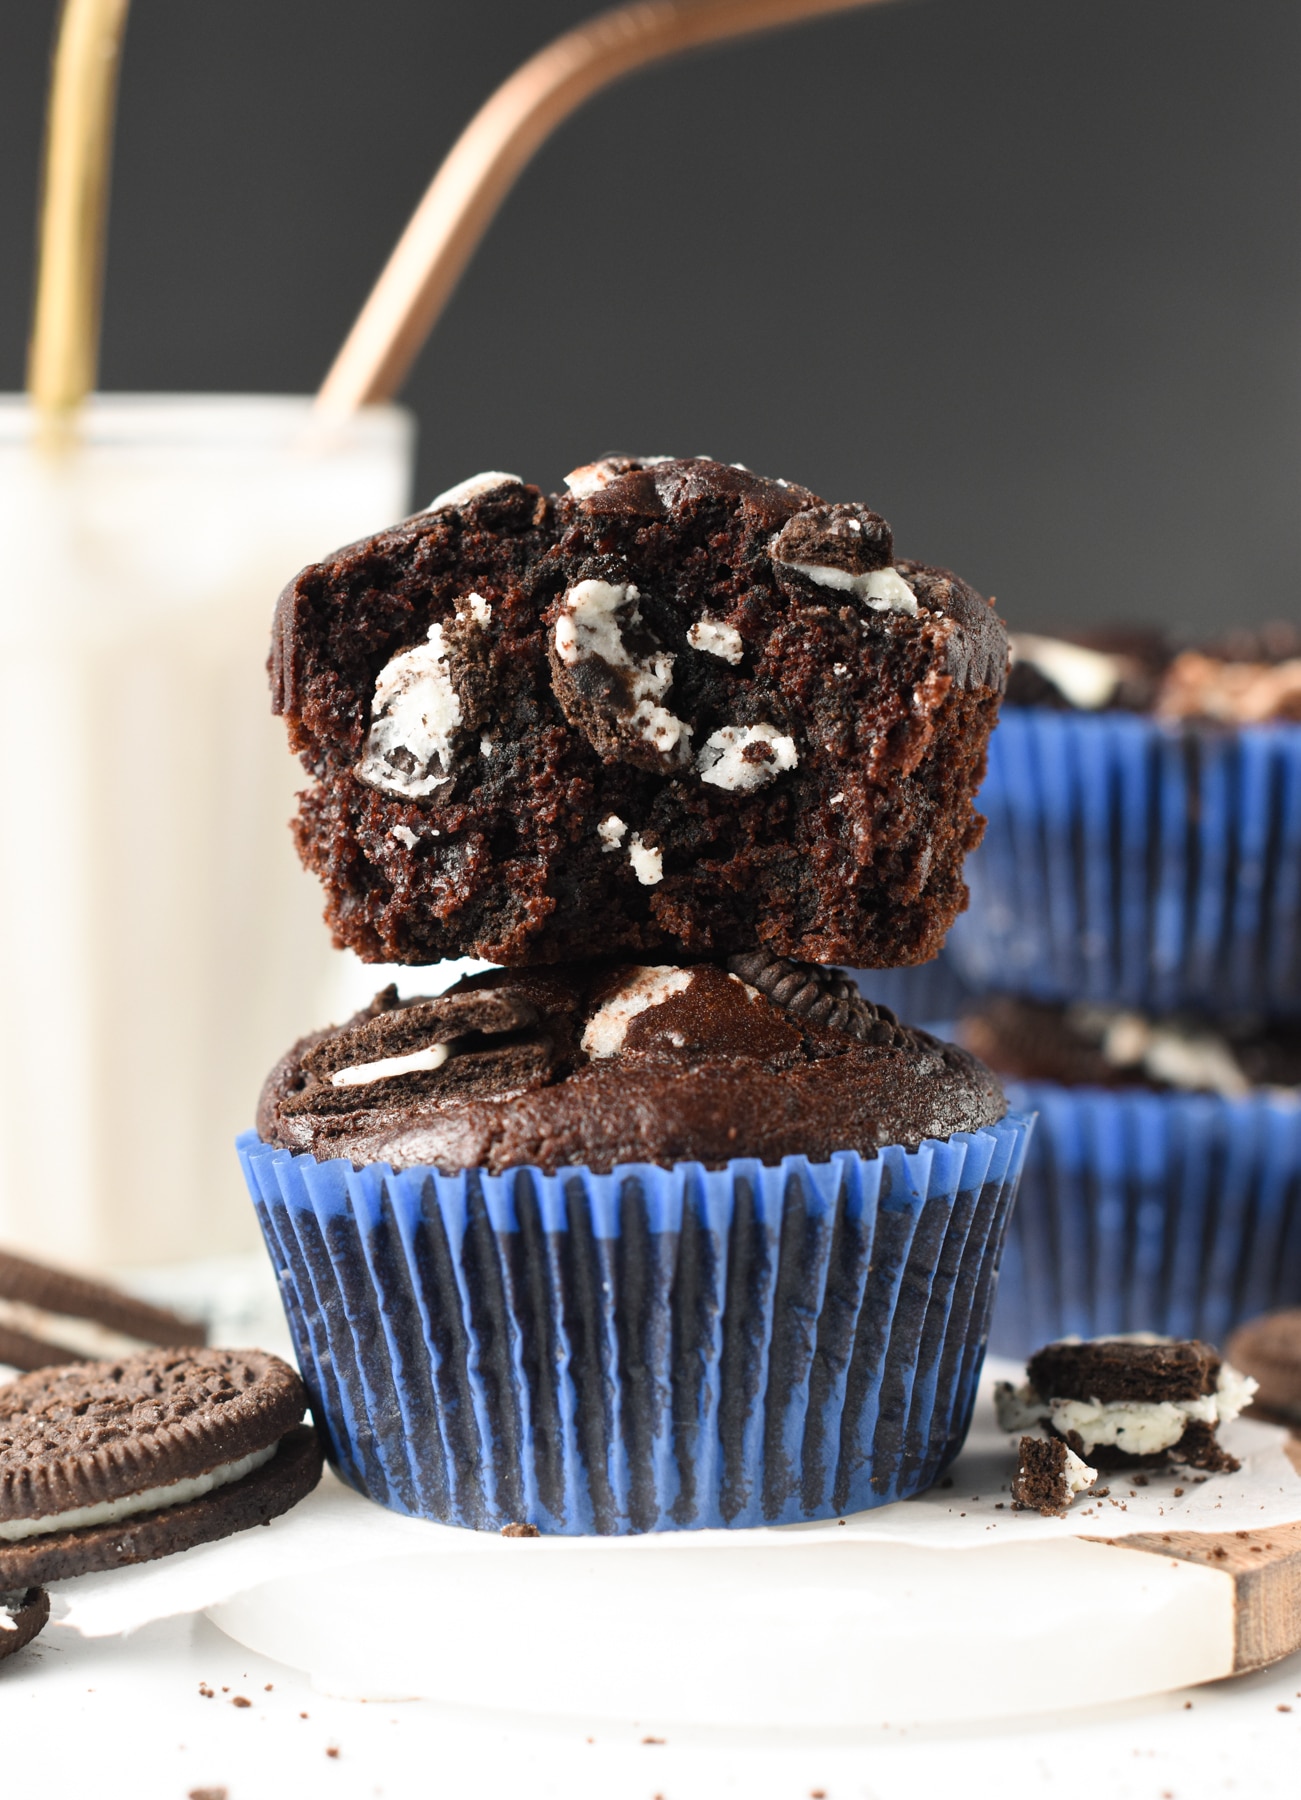 Oreo Muffins Vegan Egg Free Dairy Free Oreo Cupcakes for Party